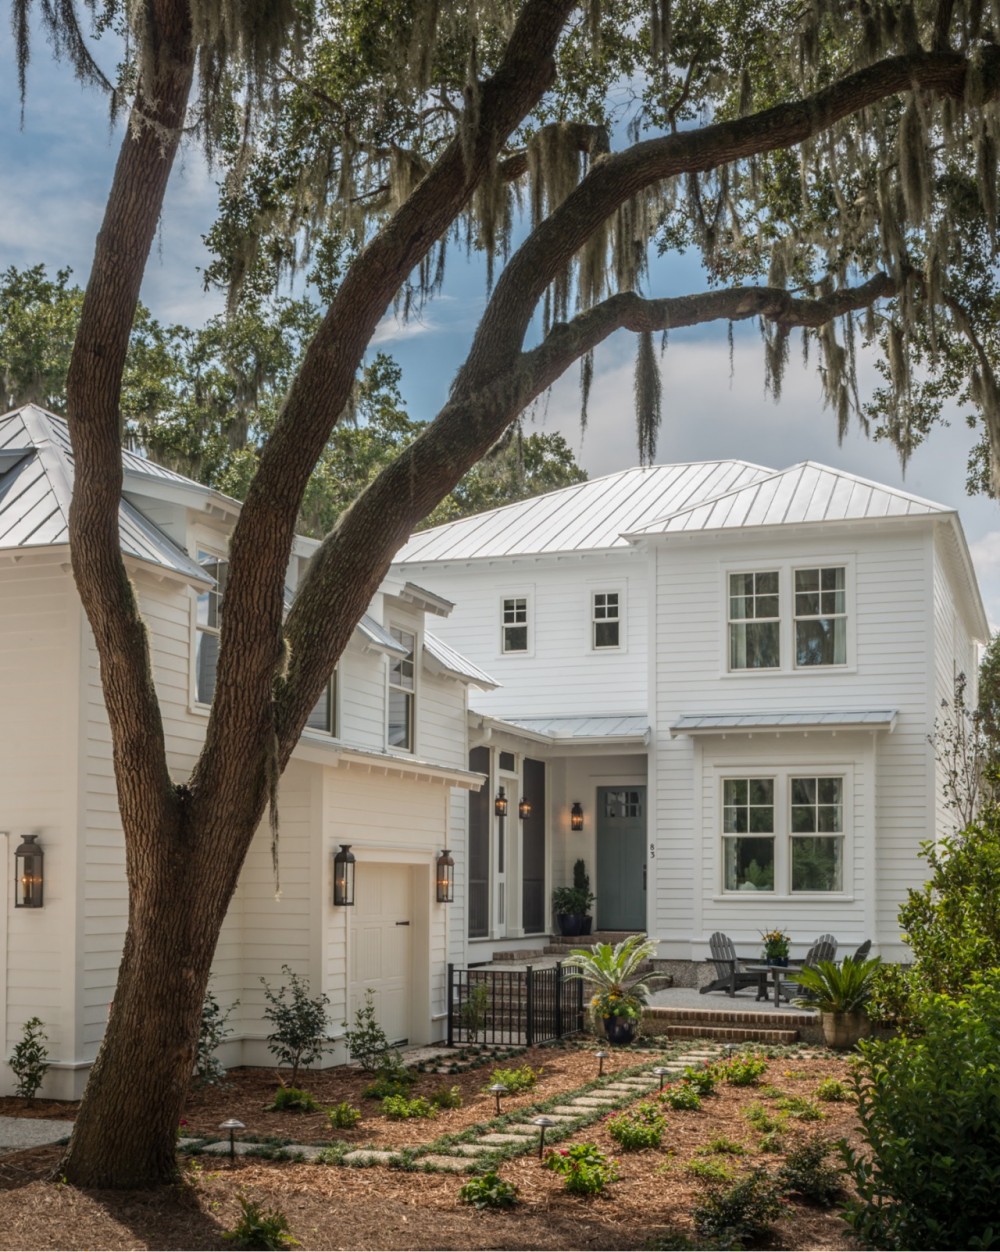   Deep eaves, exposed rafter tails, a metal roof for repelling heavy rains, and a tall live oak dripping with Spanish moss.  